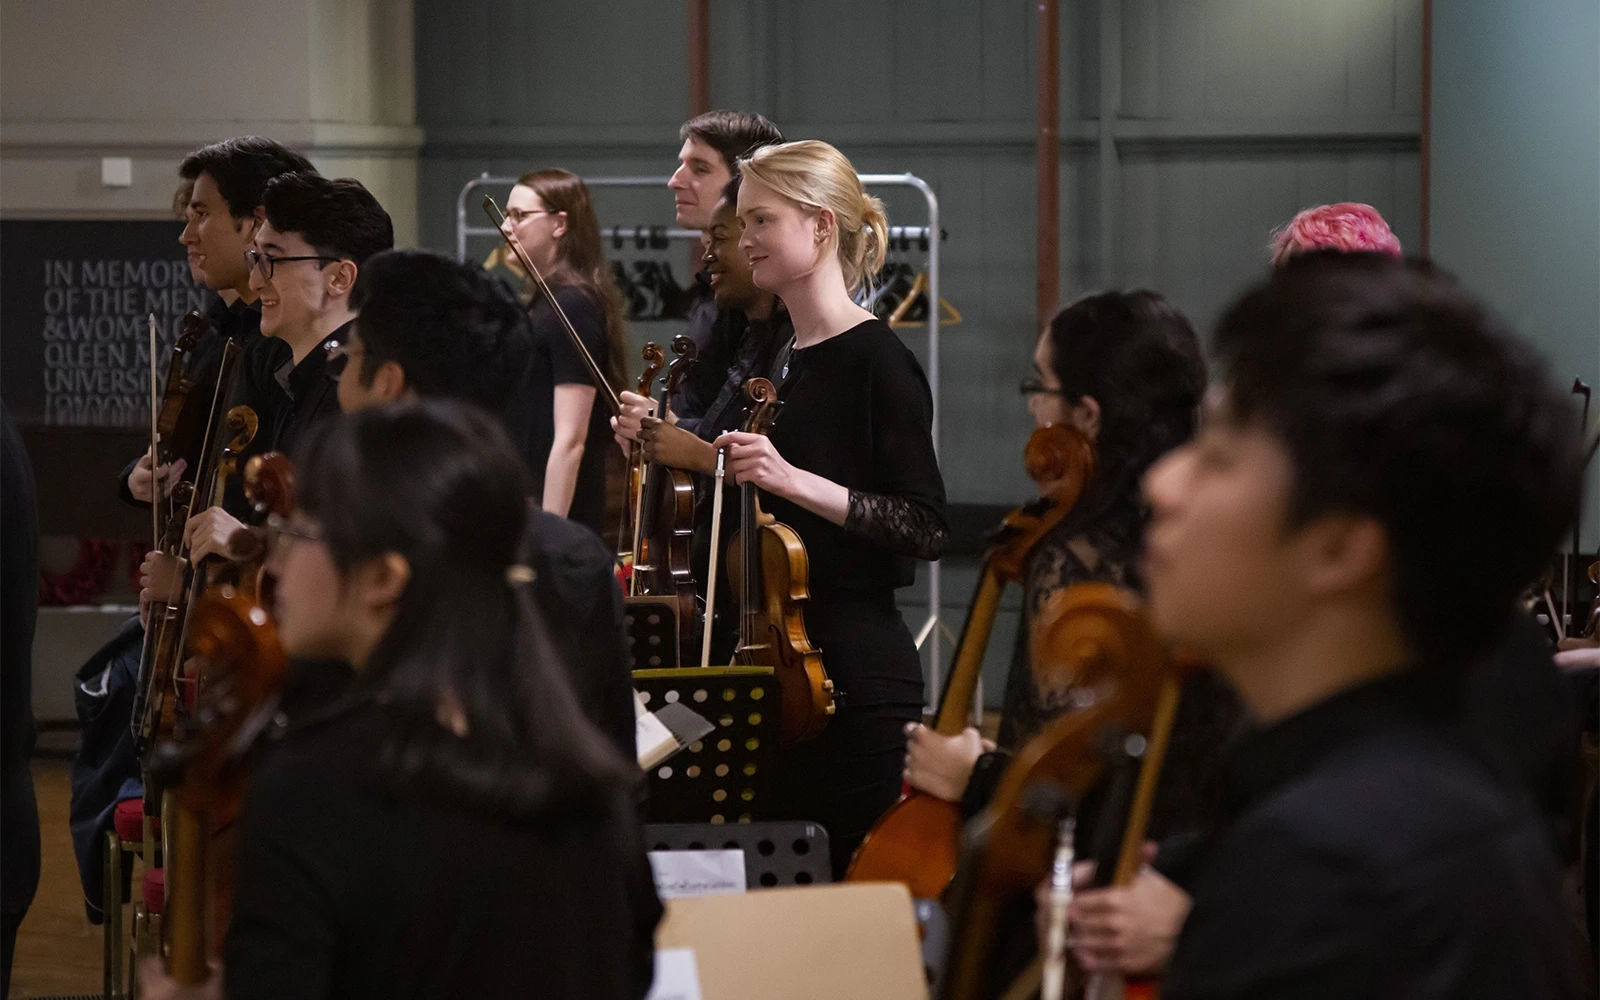 The strings section standing up to receive applause at the end of an orchestral concert